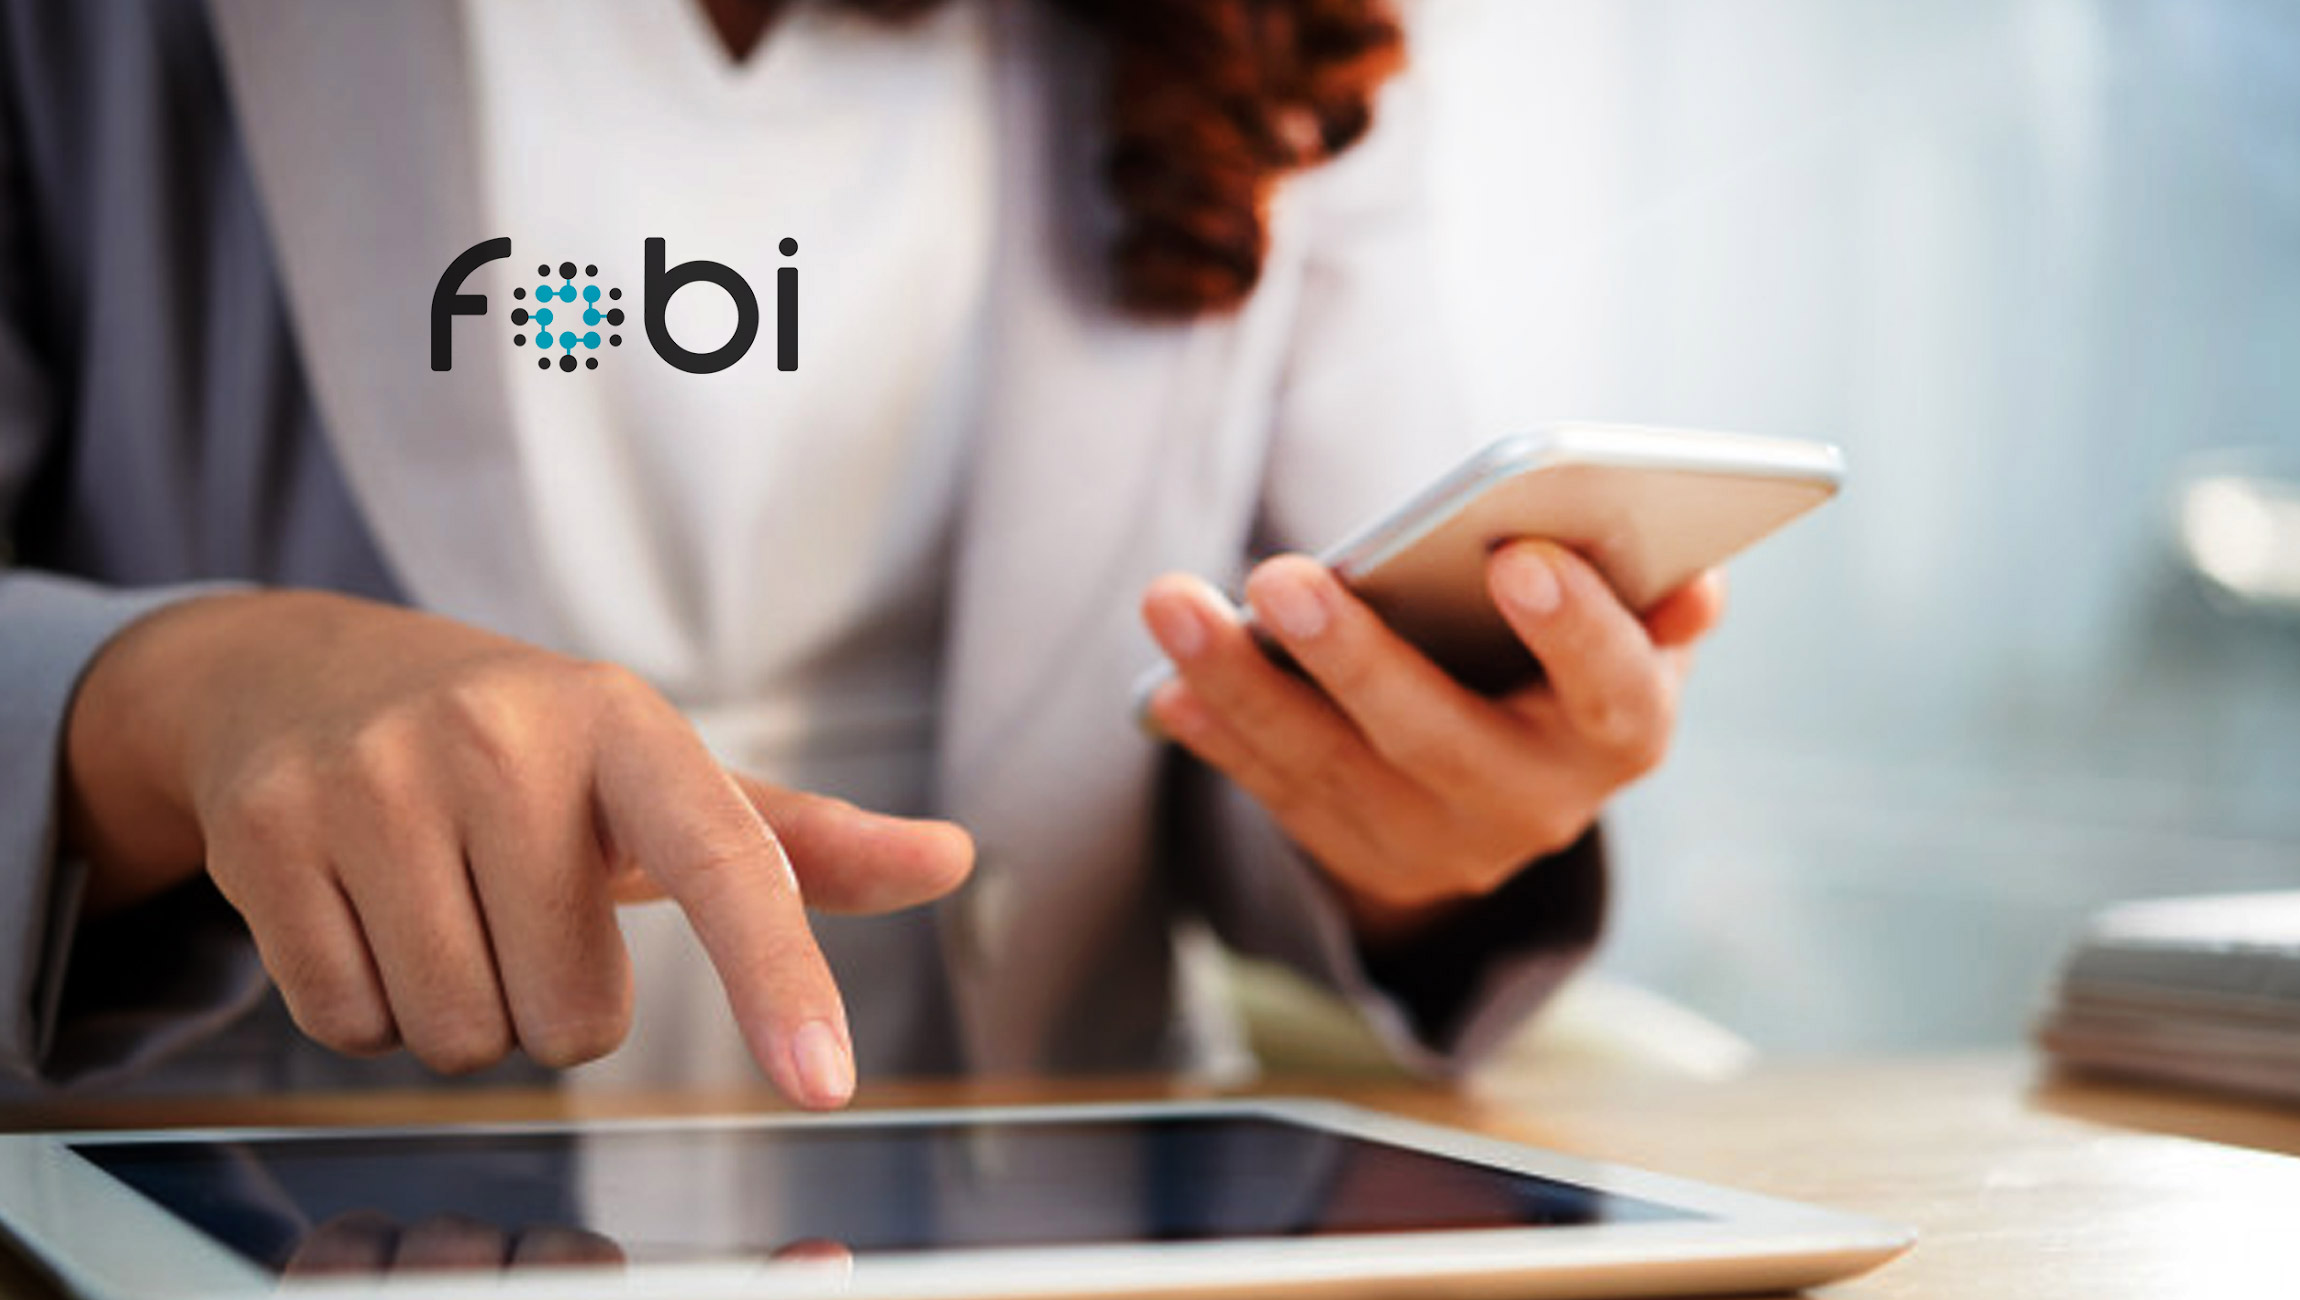 Fobi-Combines-the-Power-of-its-AI_-Big-Data-and-Wallet-Pass-Technology-to-Deliver-Digital-and-Contactless-Golf-Membership-Solution